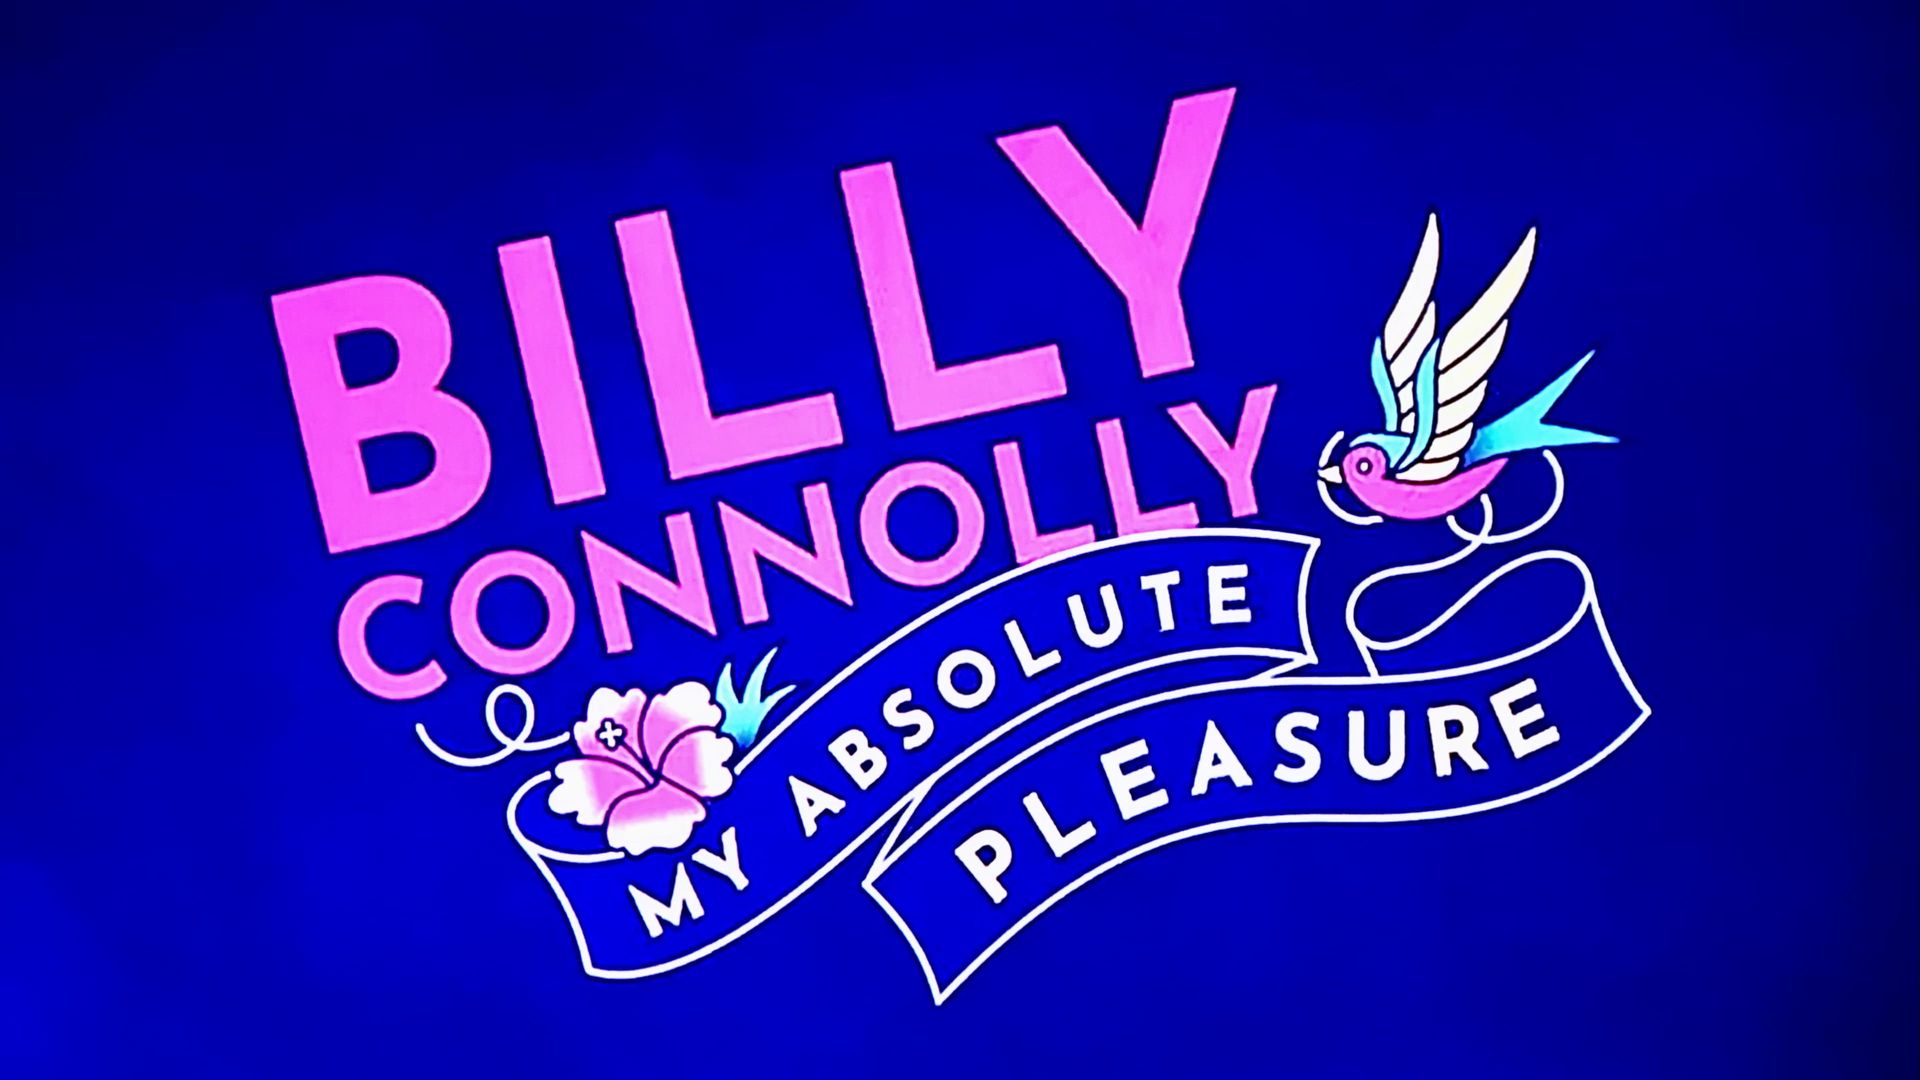 Billy Connolly: My Absolute Pleasure background